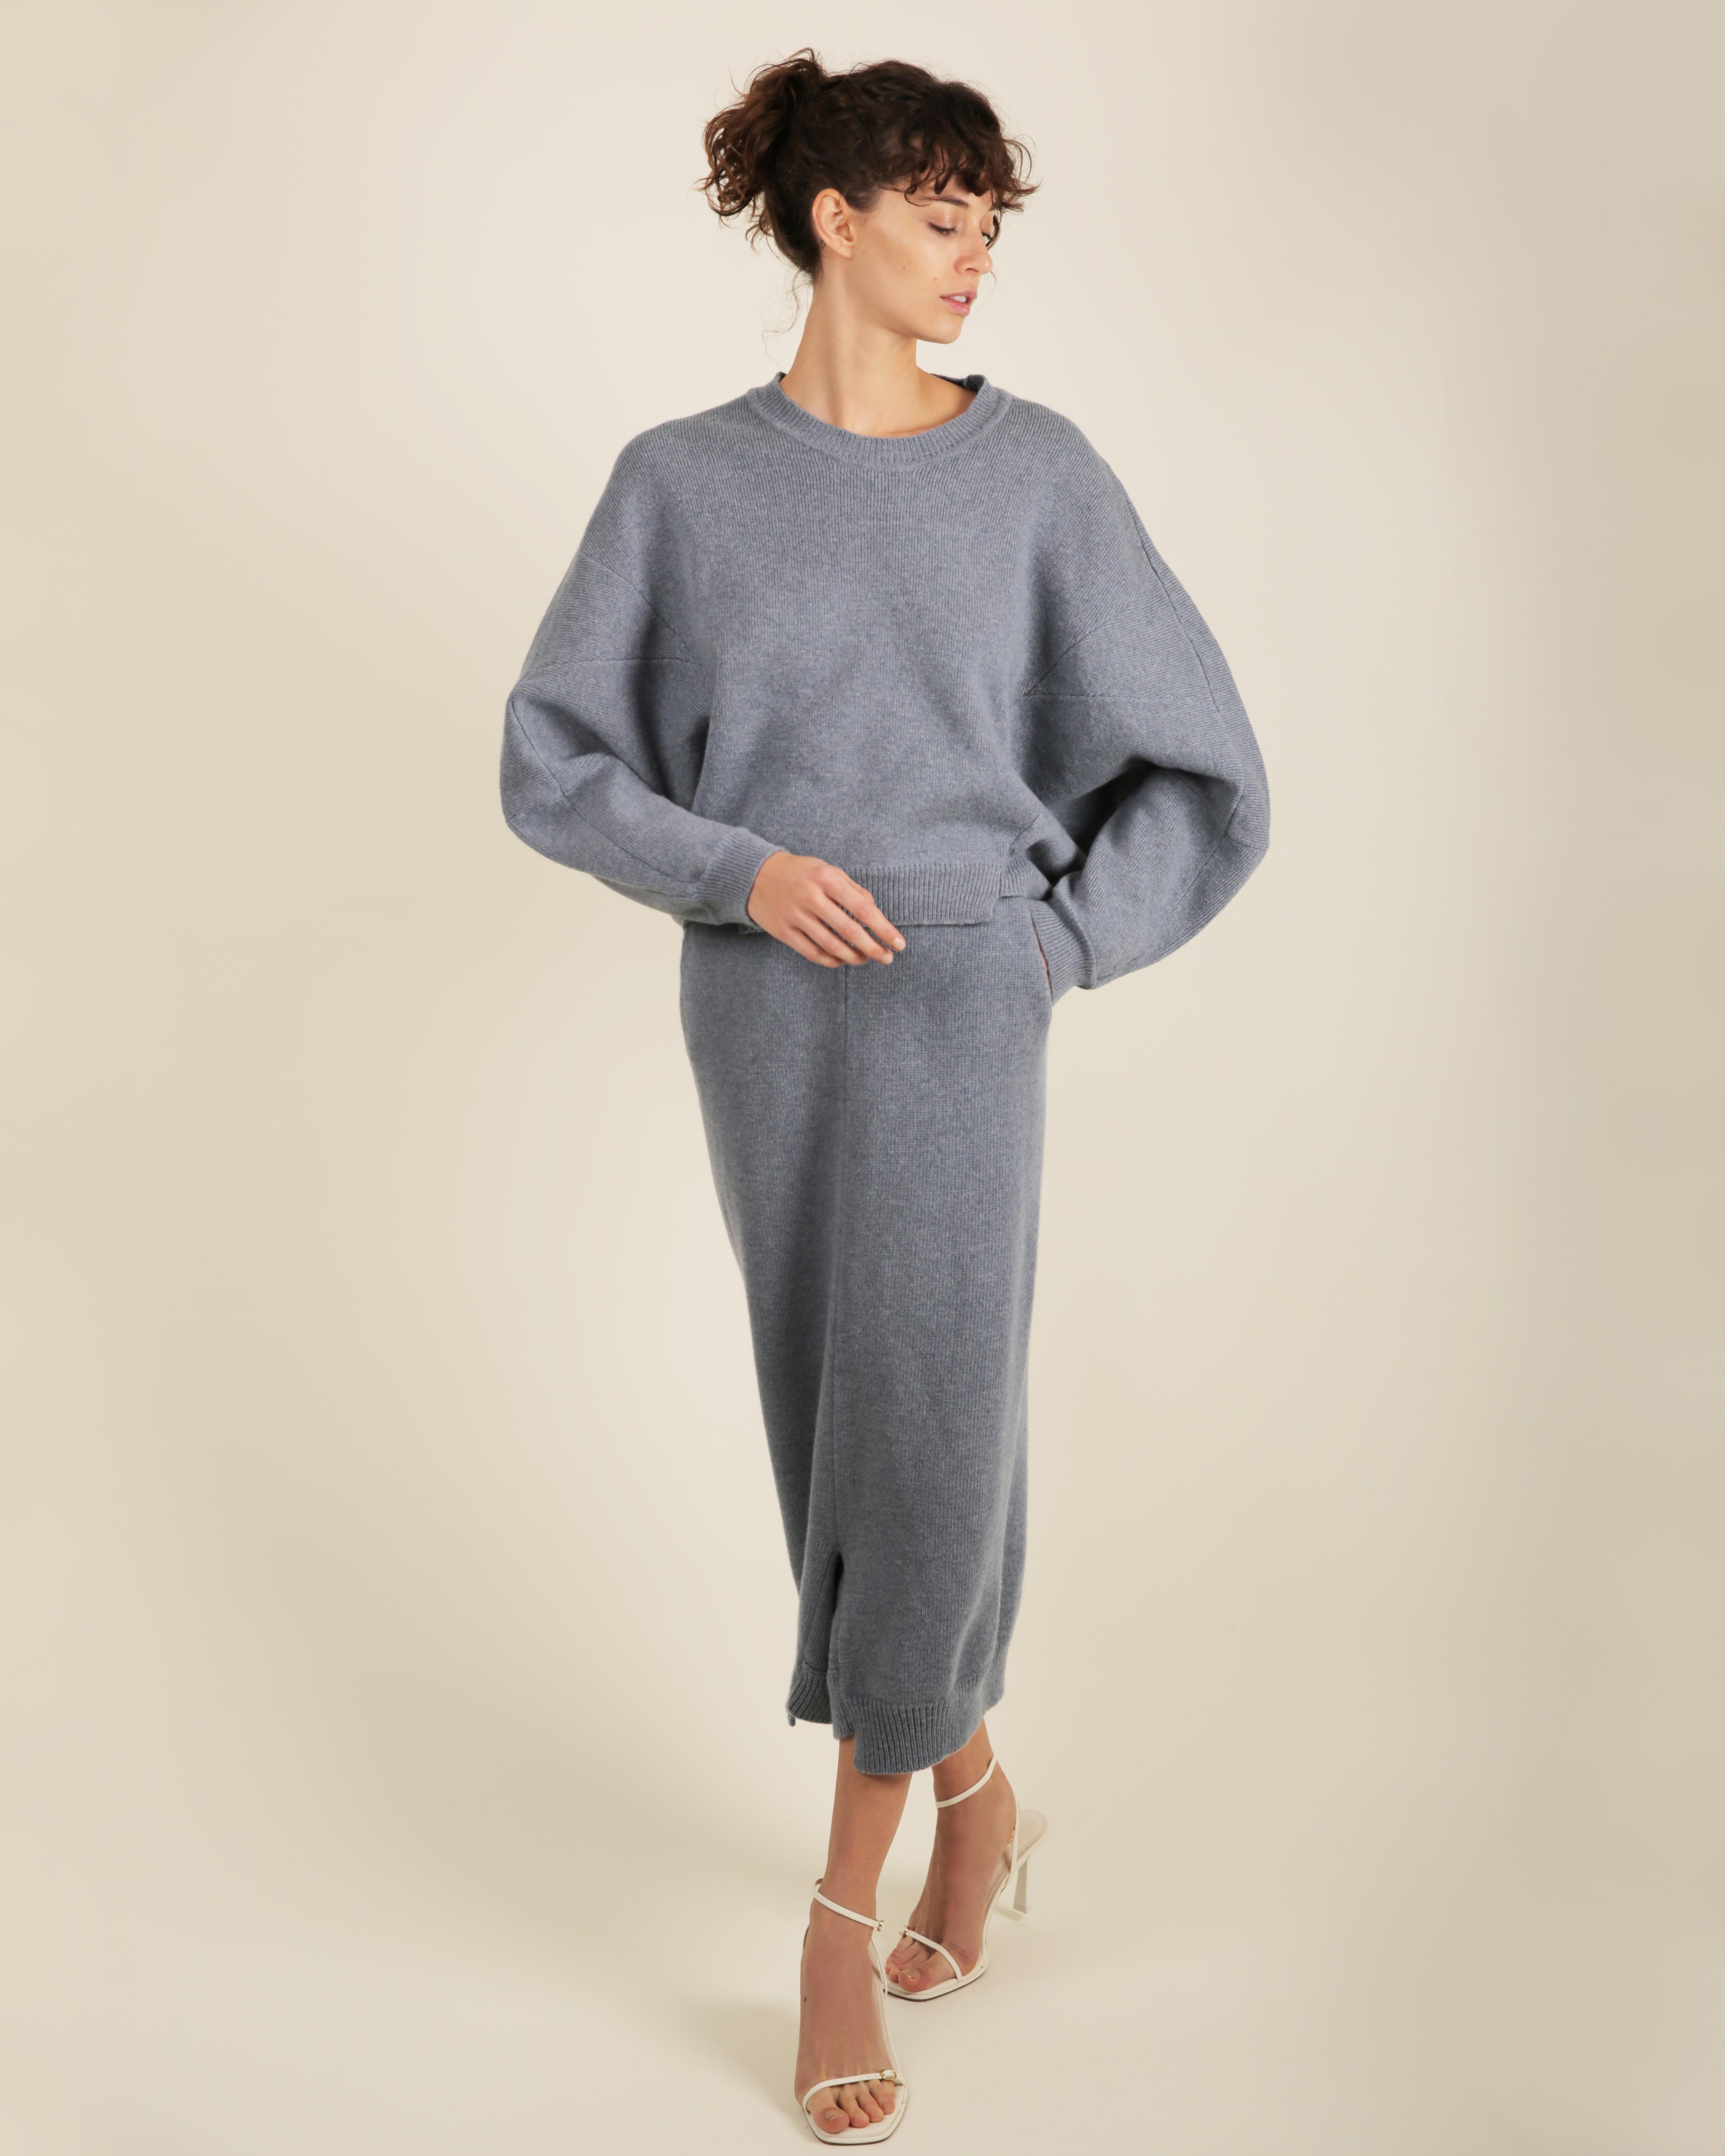 LOVE LALI Vintage

Stella McCartney Fall 2018 matching set in a dusky blue
Consists or an oversized drop shoulder sweater with ribbed neck, cuffs and hemline - and matching sarouel (dropped crotch) pants, featuring an elasticated high waist, two